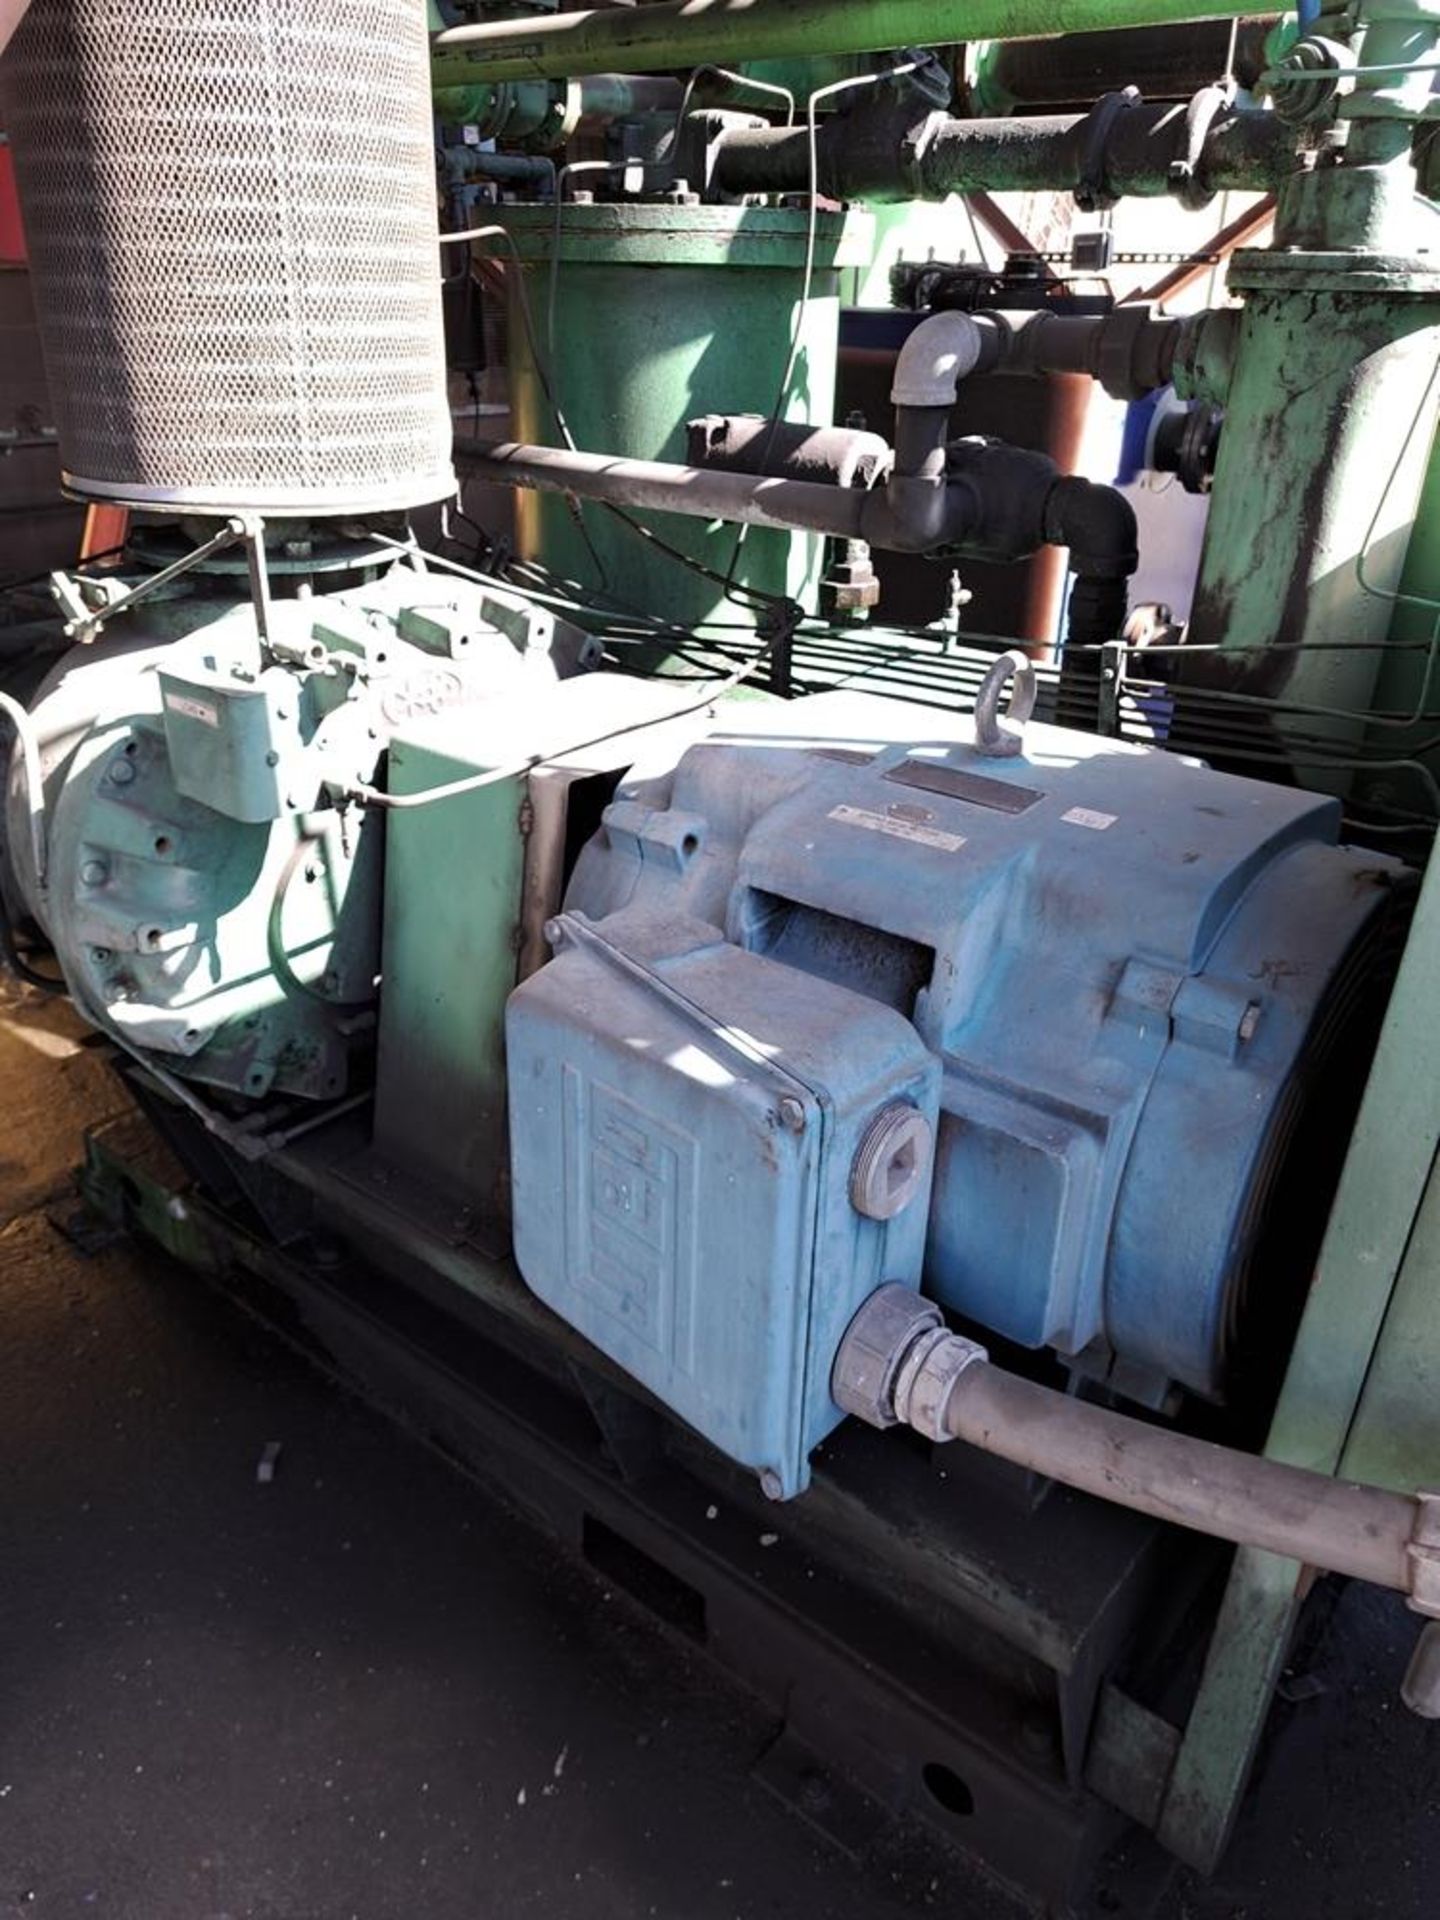 Sullair Air Compressor, 200 h.p., 30" Dia. X 54" L holding tank: Required Loading Fee $3000.00, - Image 3 of 4